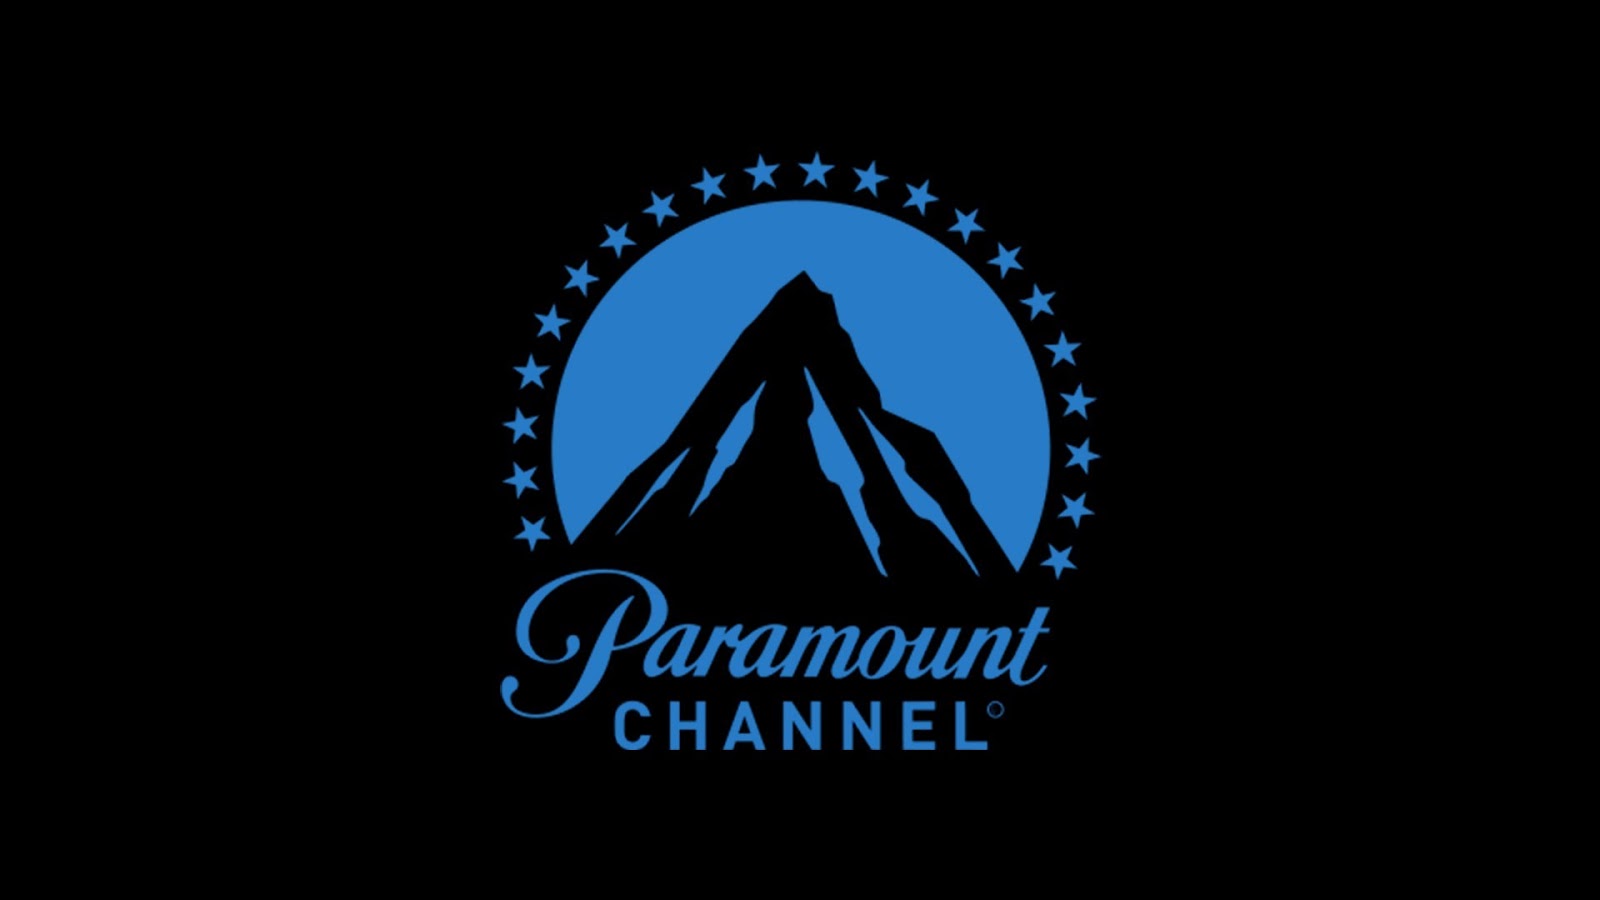 What Channel Is Paramount On Charter